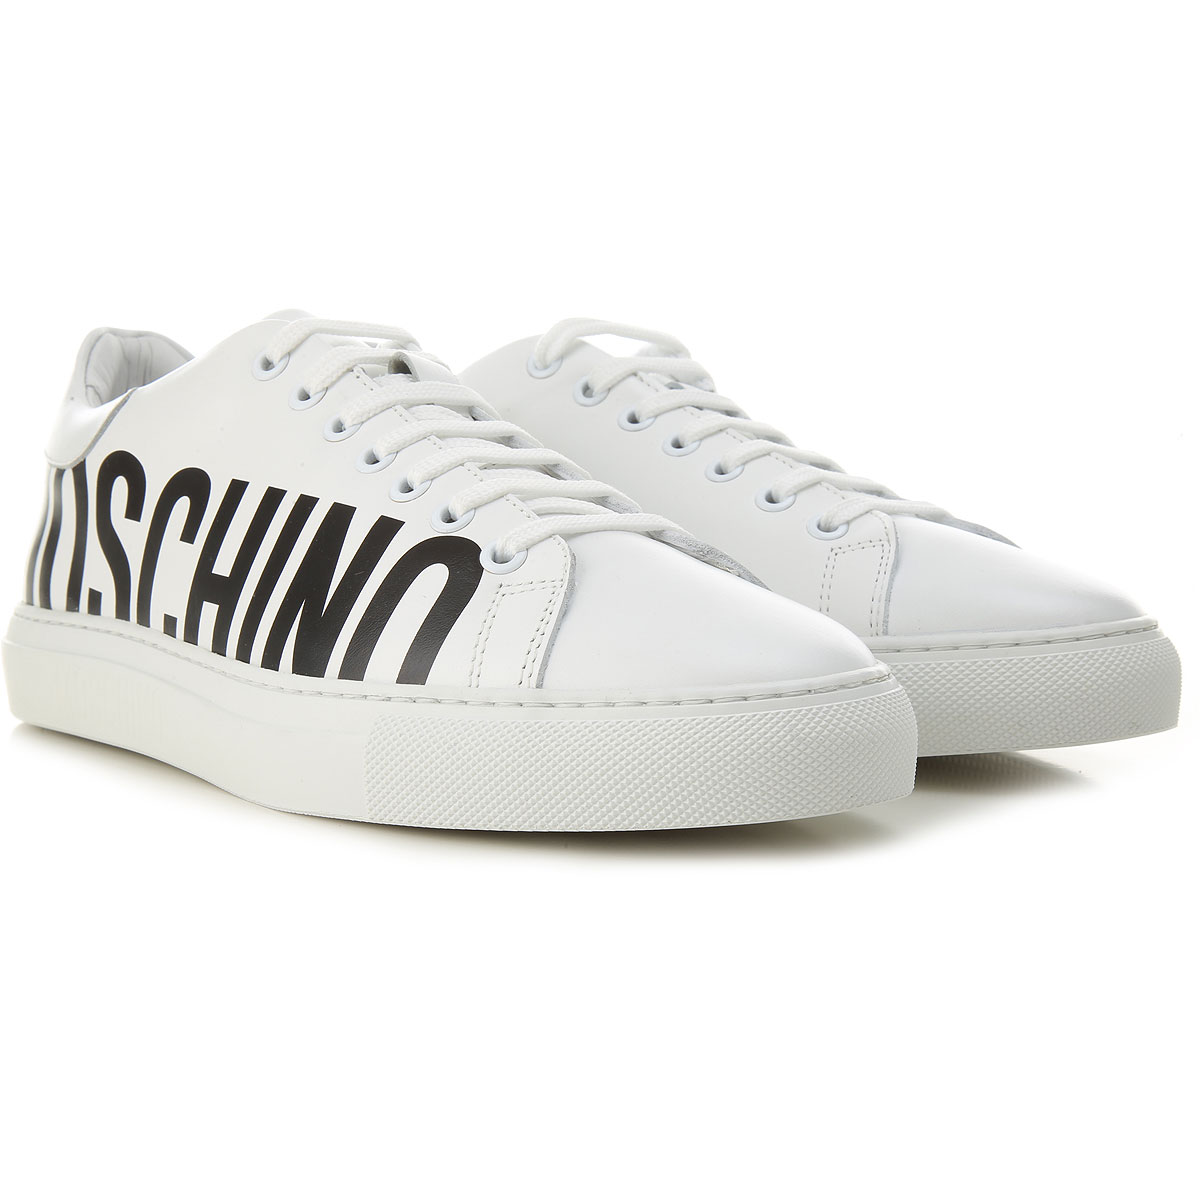 Mens Shoes Moschino, Style code: mb15012g1cga0100--